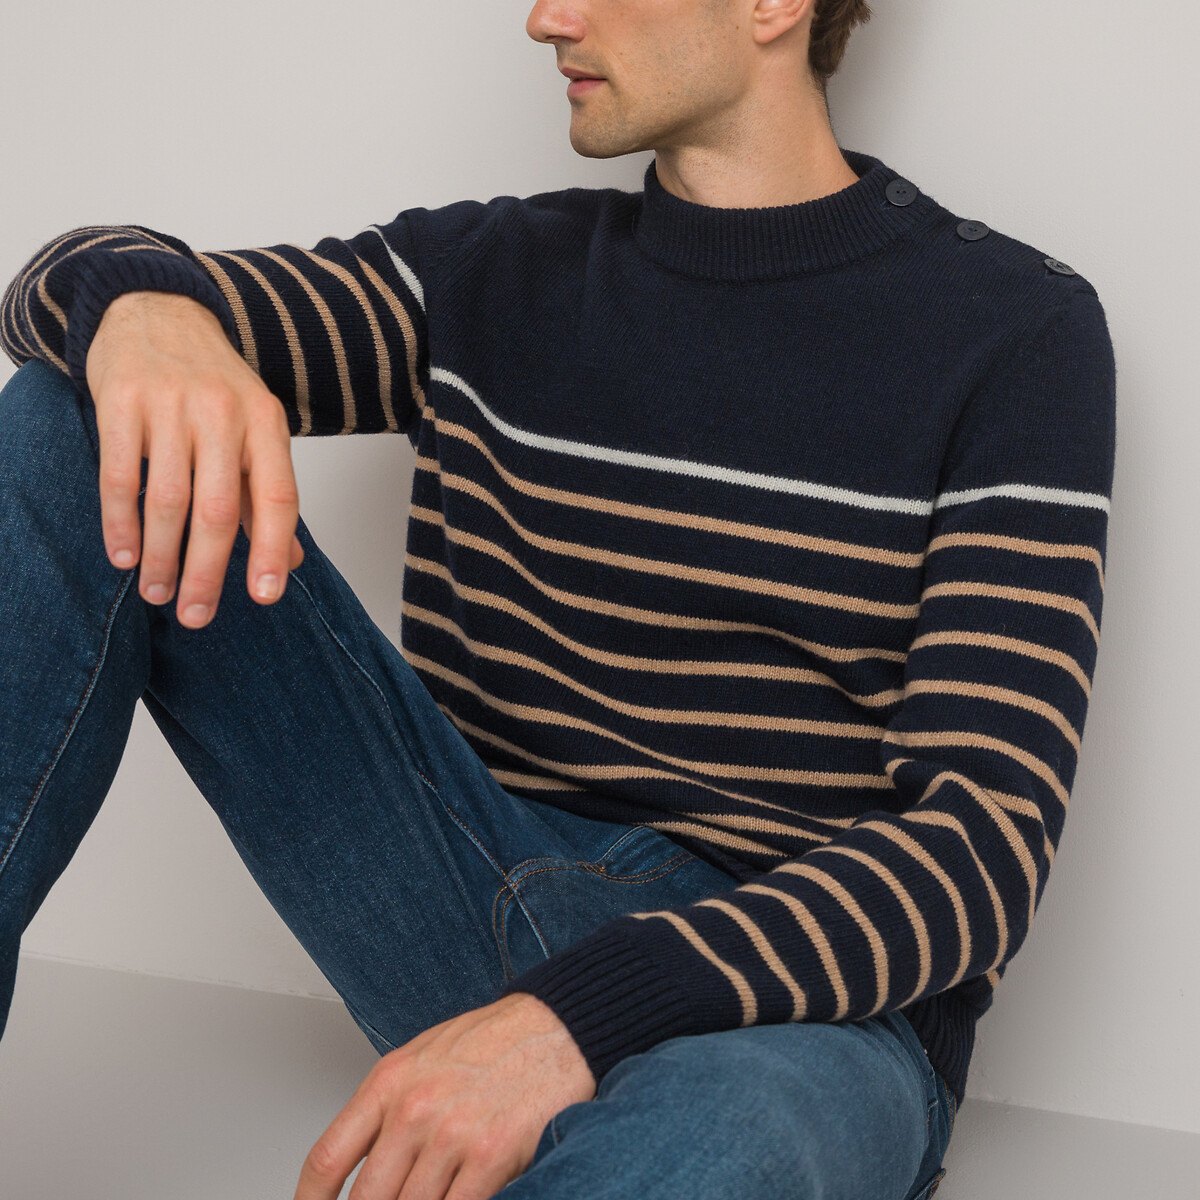 Breton Striped Jumper in Recycled Wool Mix, Made in France